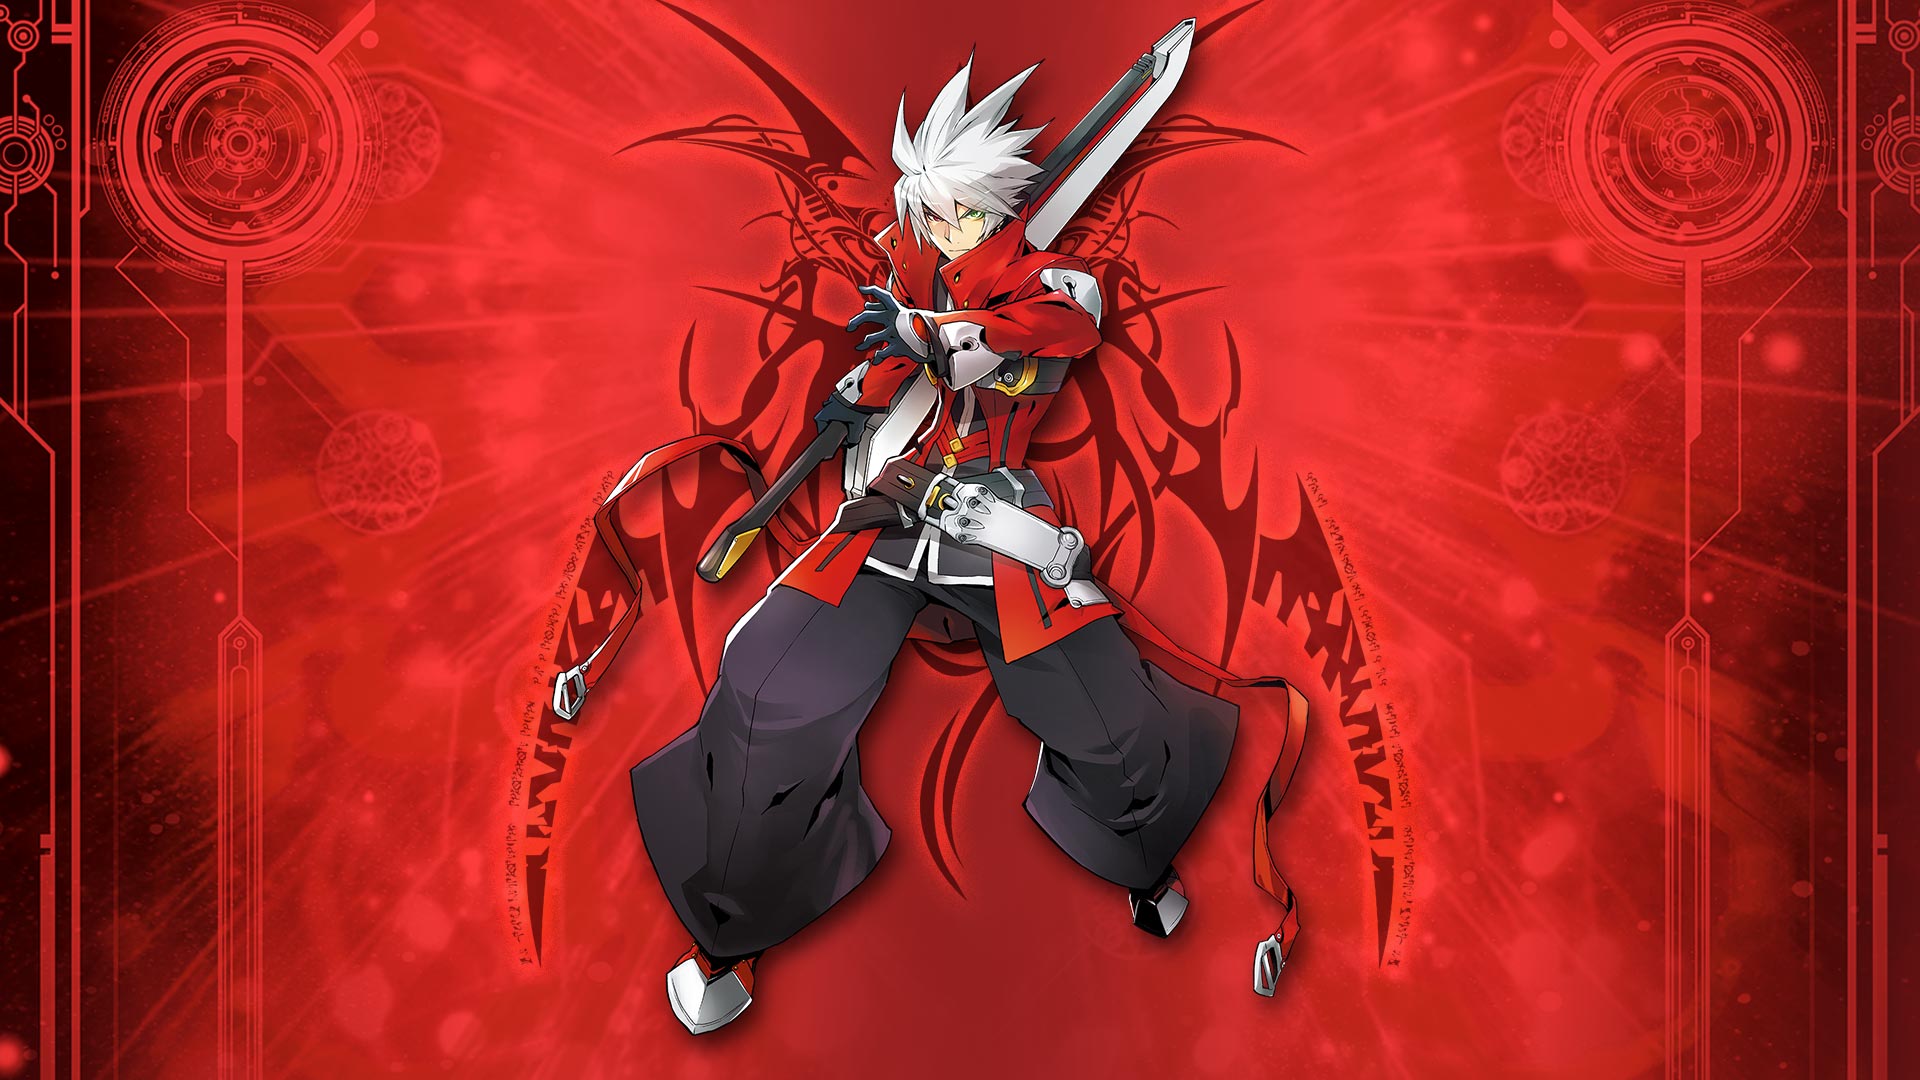 Blazblue Central Fiction Wallpaper 011 Ragna The Bloodedge Wallpapers Ethereal Games